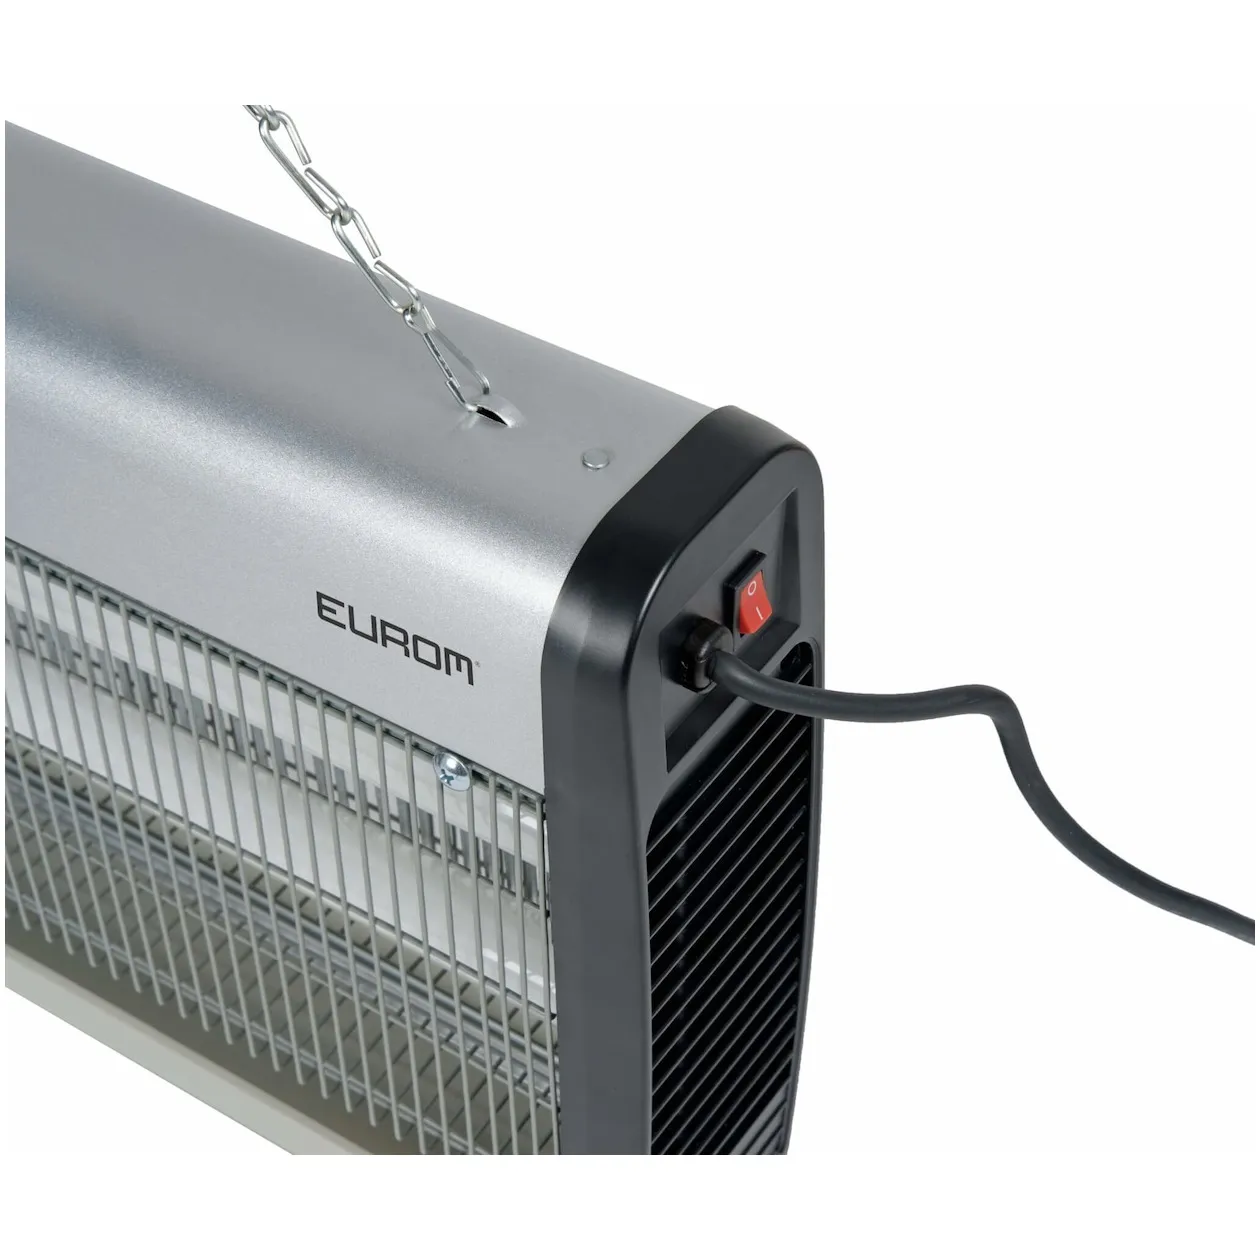 Eurom Fly Away metal 16-2 Insect killer